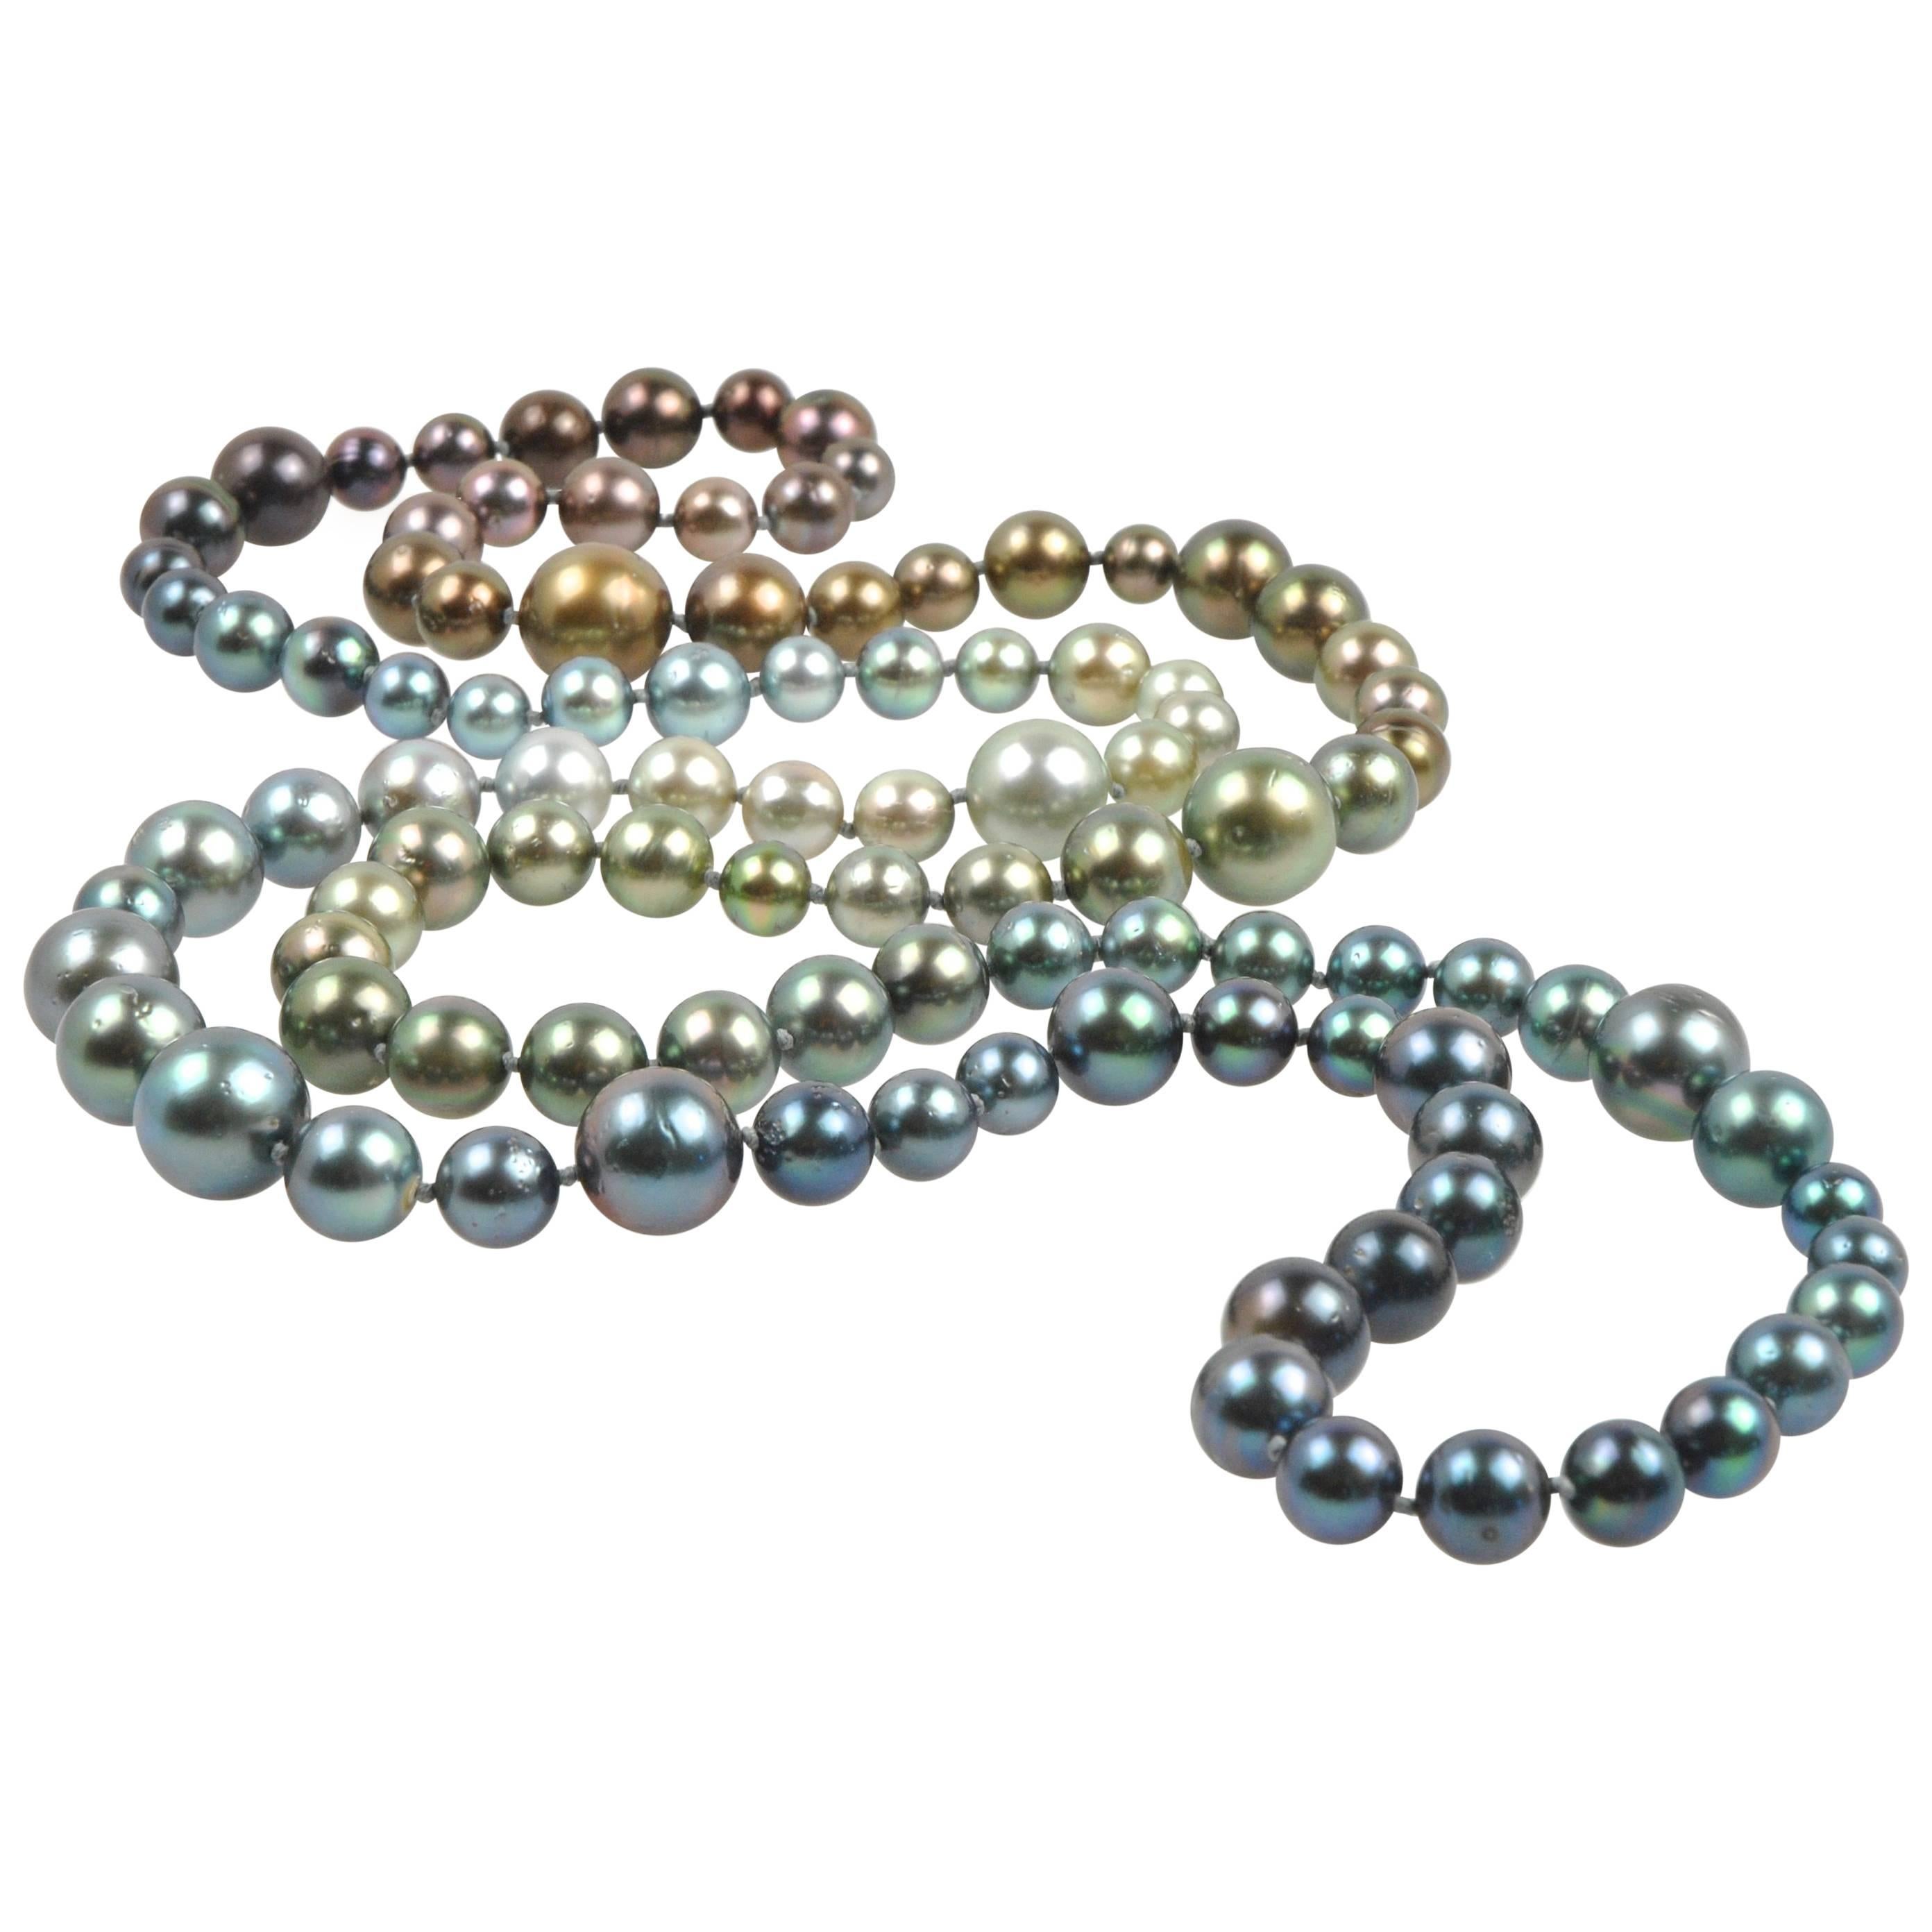 Long Tahitian South Sea Rainbow Pearl Necklace in Every Natural Color